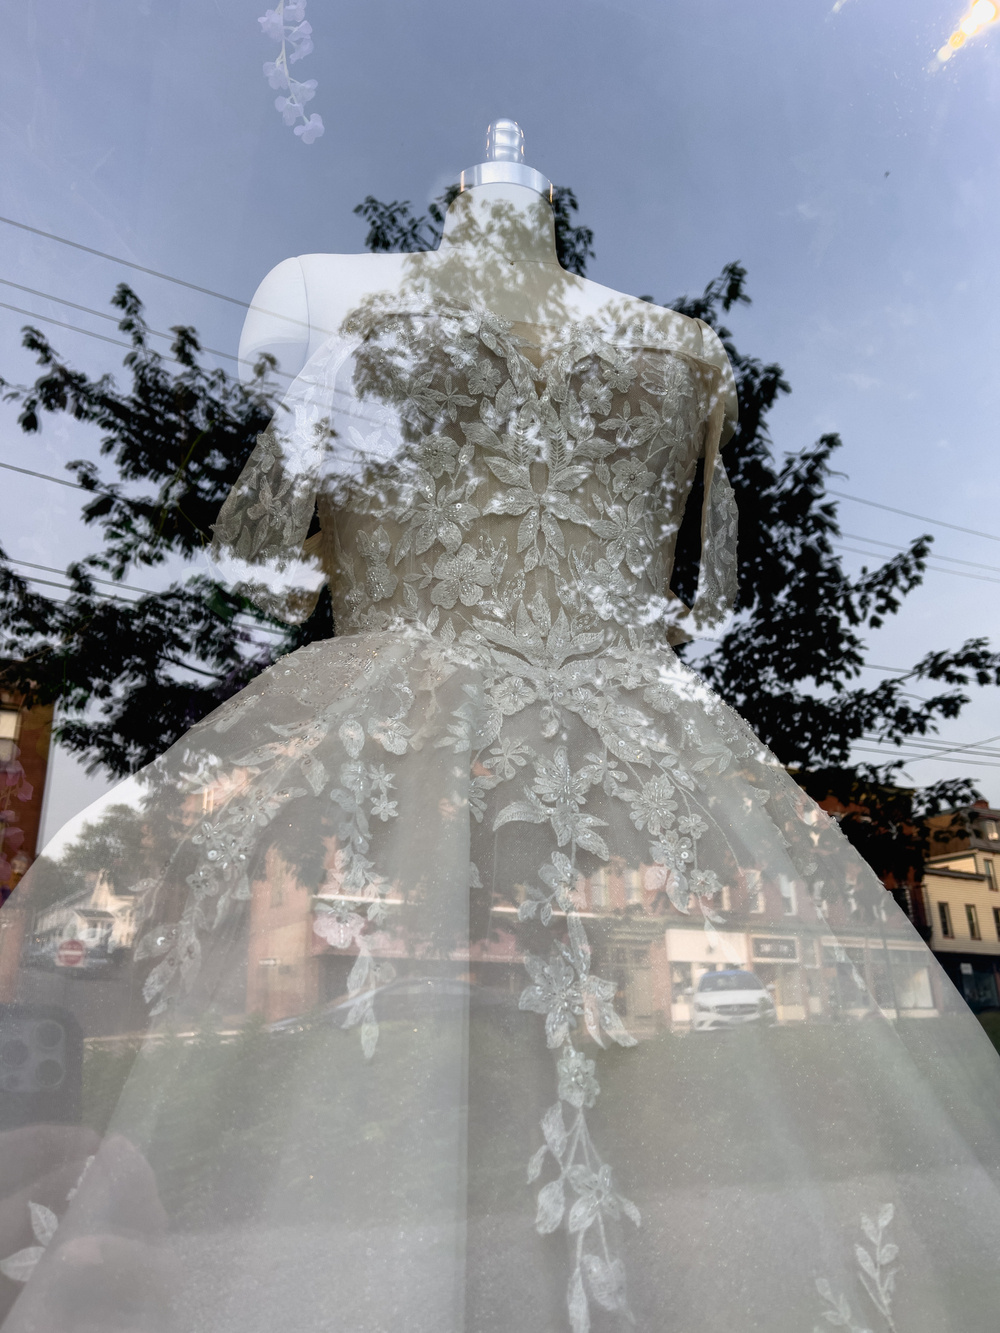 Mannequin with wedding dress. Reflection of tree and street overlaid.  